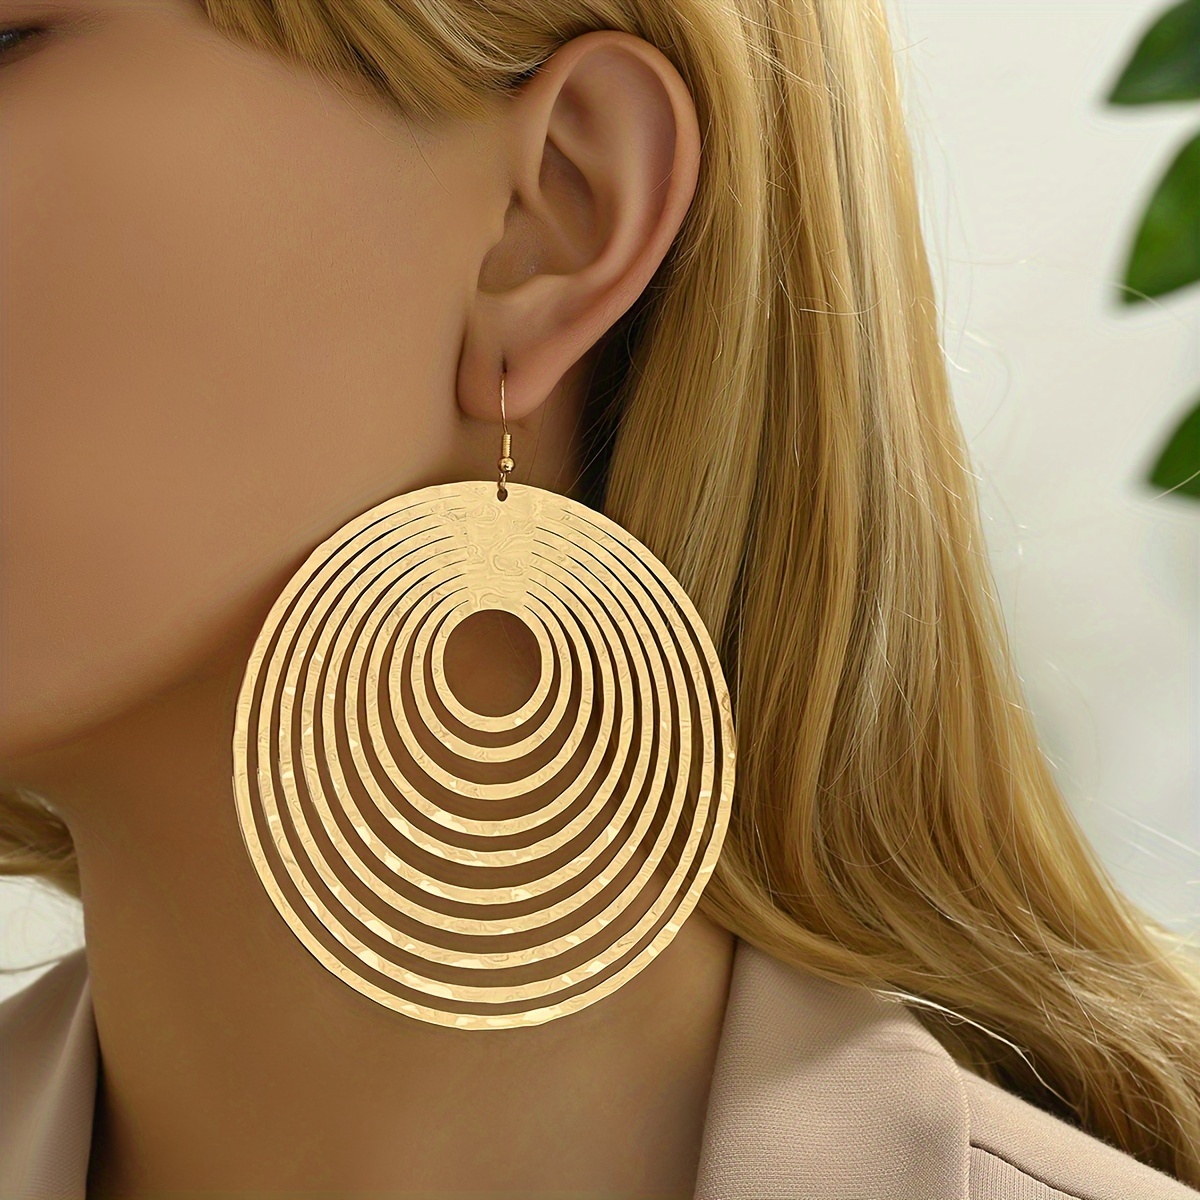 

Exaggerated Drop Earrings Hollow Circle Design Match Daily Outfits Party Accessories Perfect Decor For Cool Friends